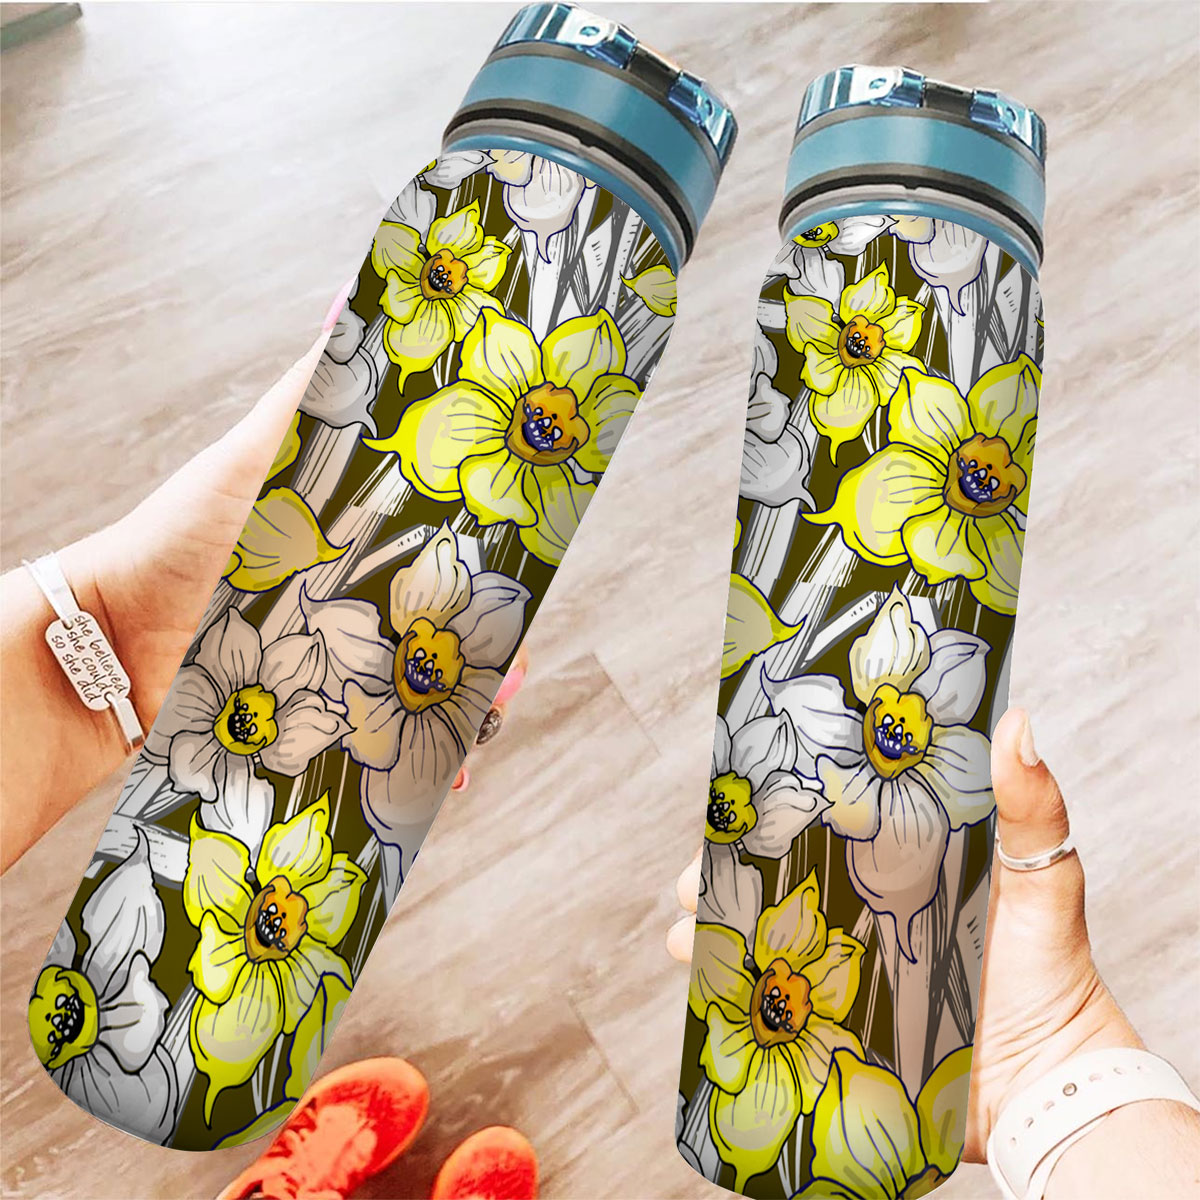 Botanical With Flowers Of Narcissus Daffodil Tracker Bottle